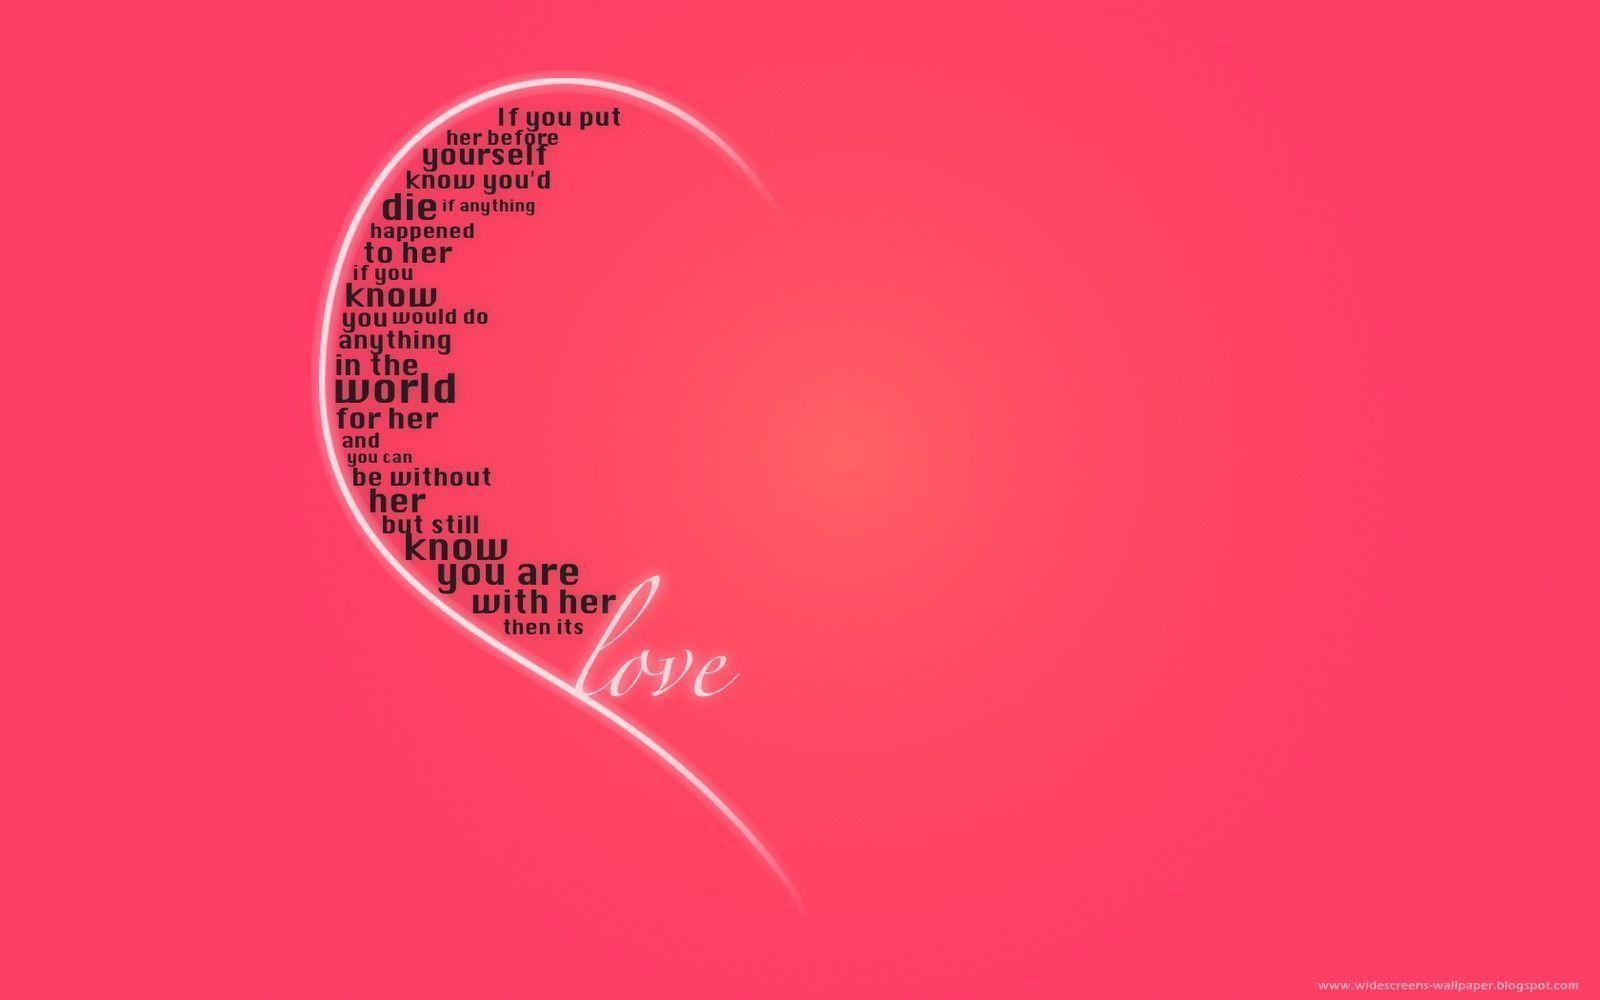 Download Beautiful Love Quotes Background Wallpaper. Full HD